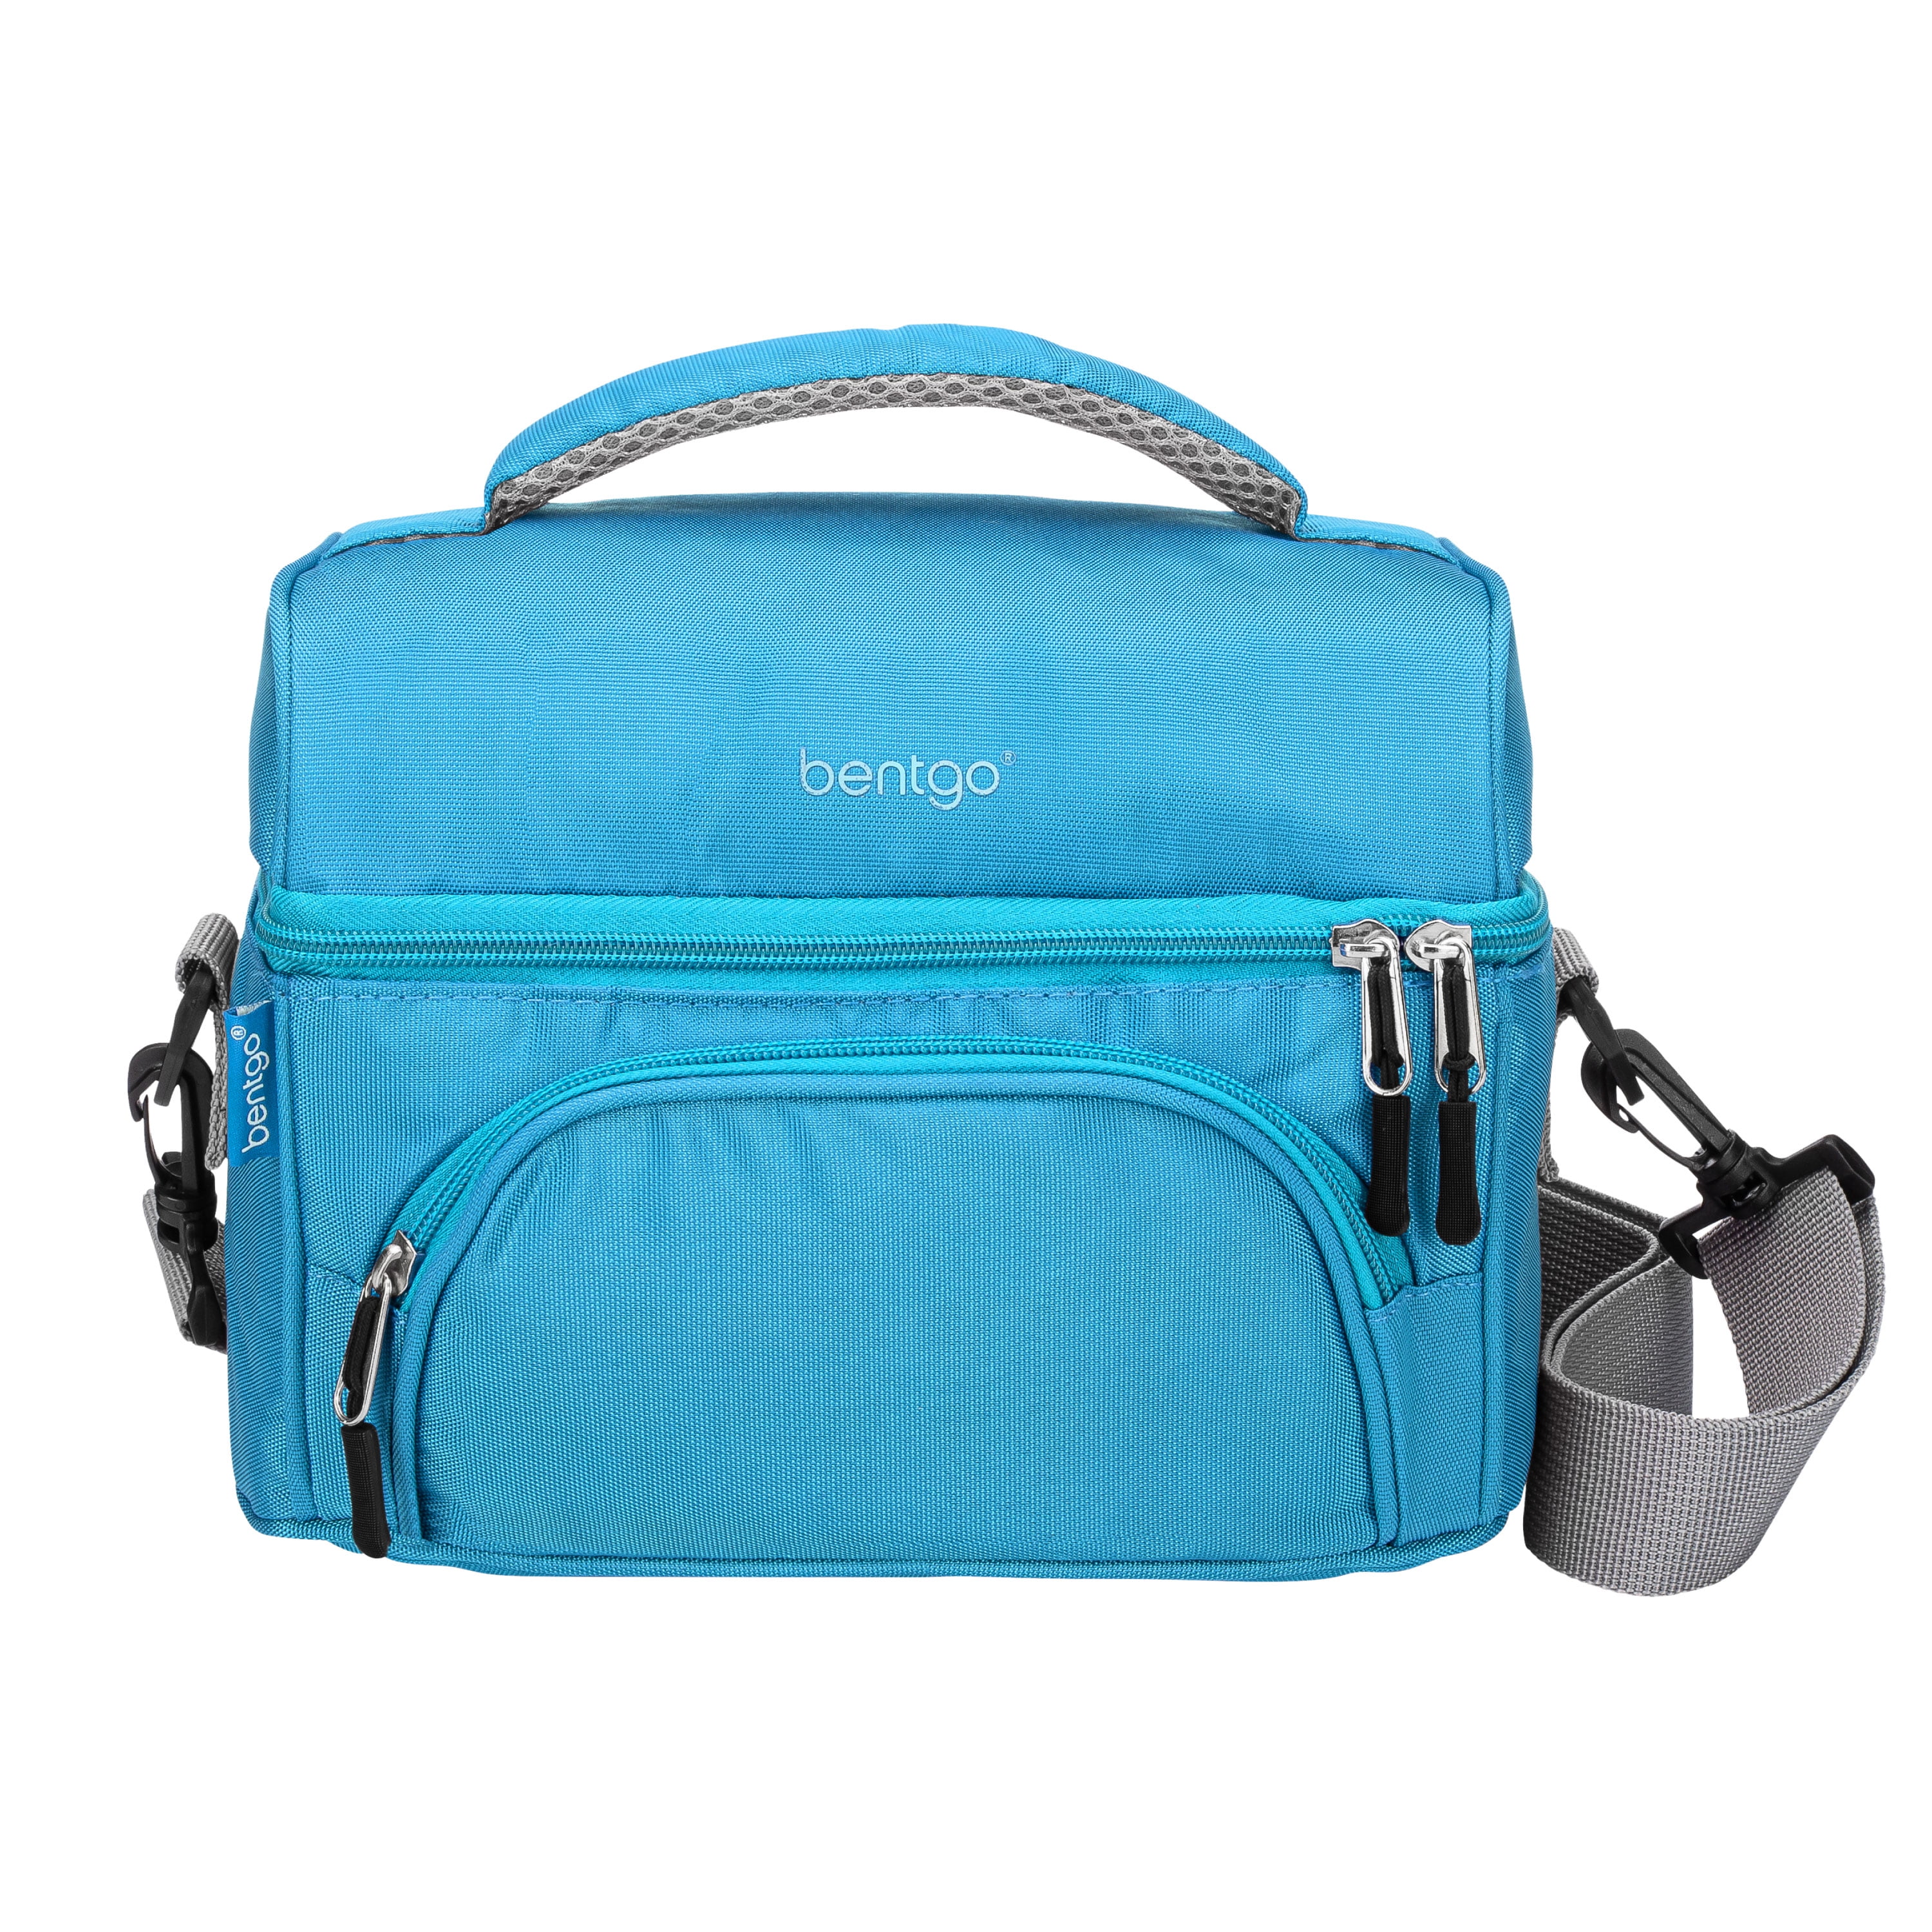 Bentgo Deluxe Lunch Bag Durable Insulated Tote Internal Mesh